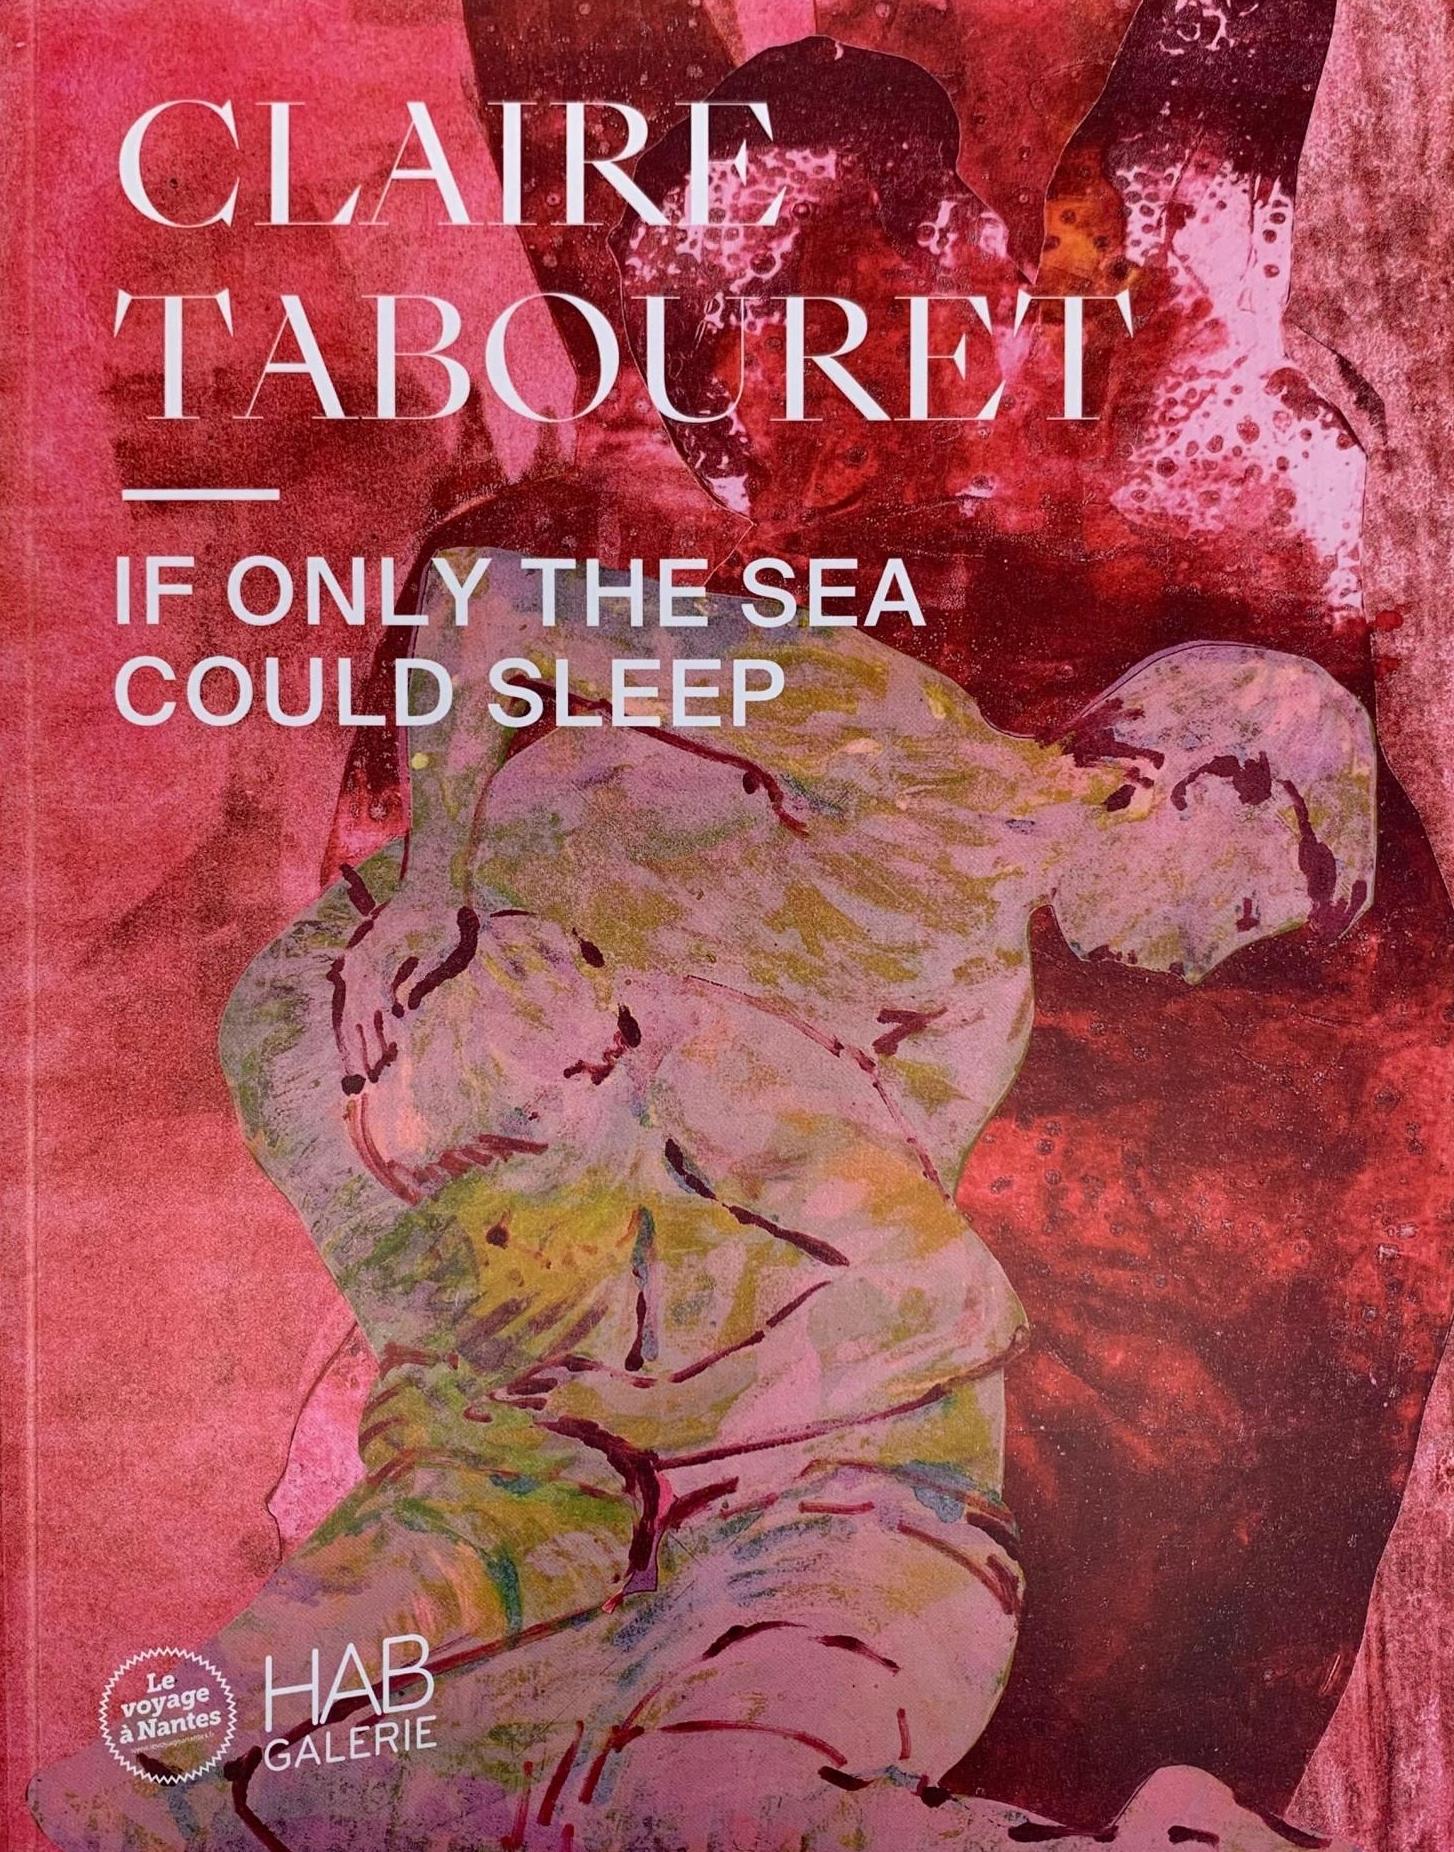 CLAIRE TABOURET - IF ONLY THE SEA COULD SLEEP